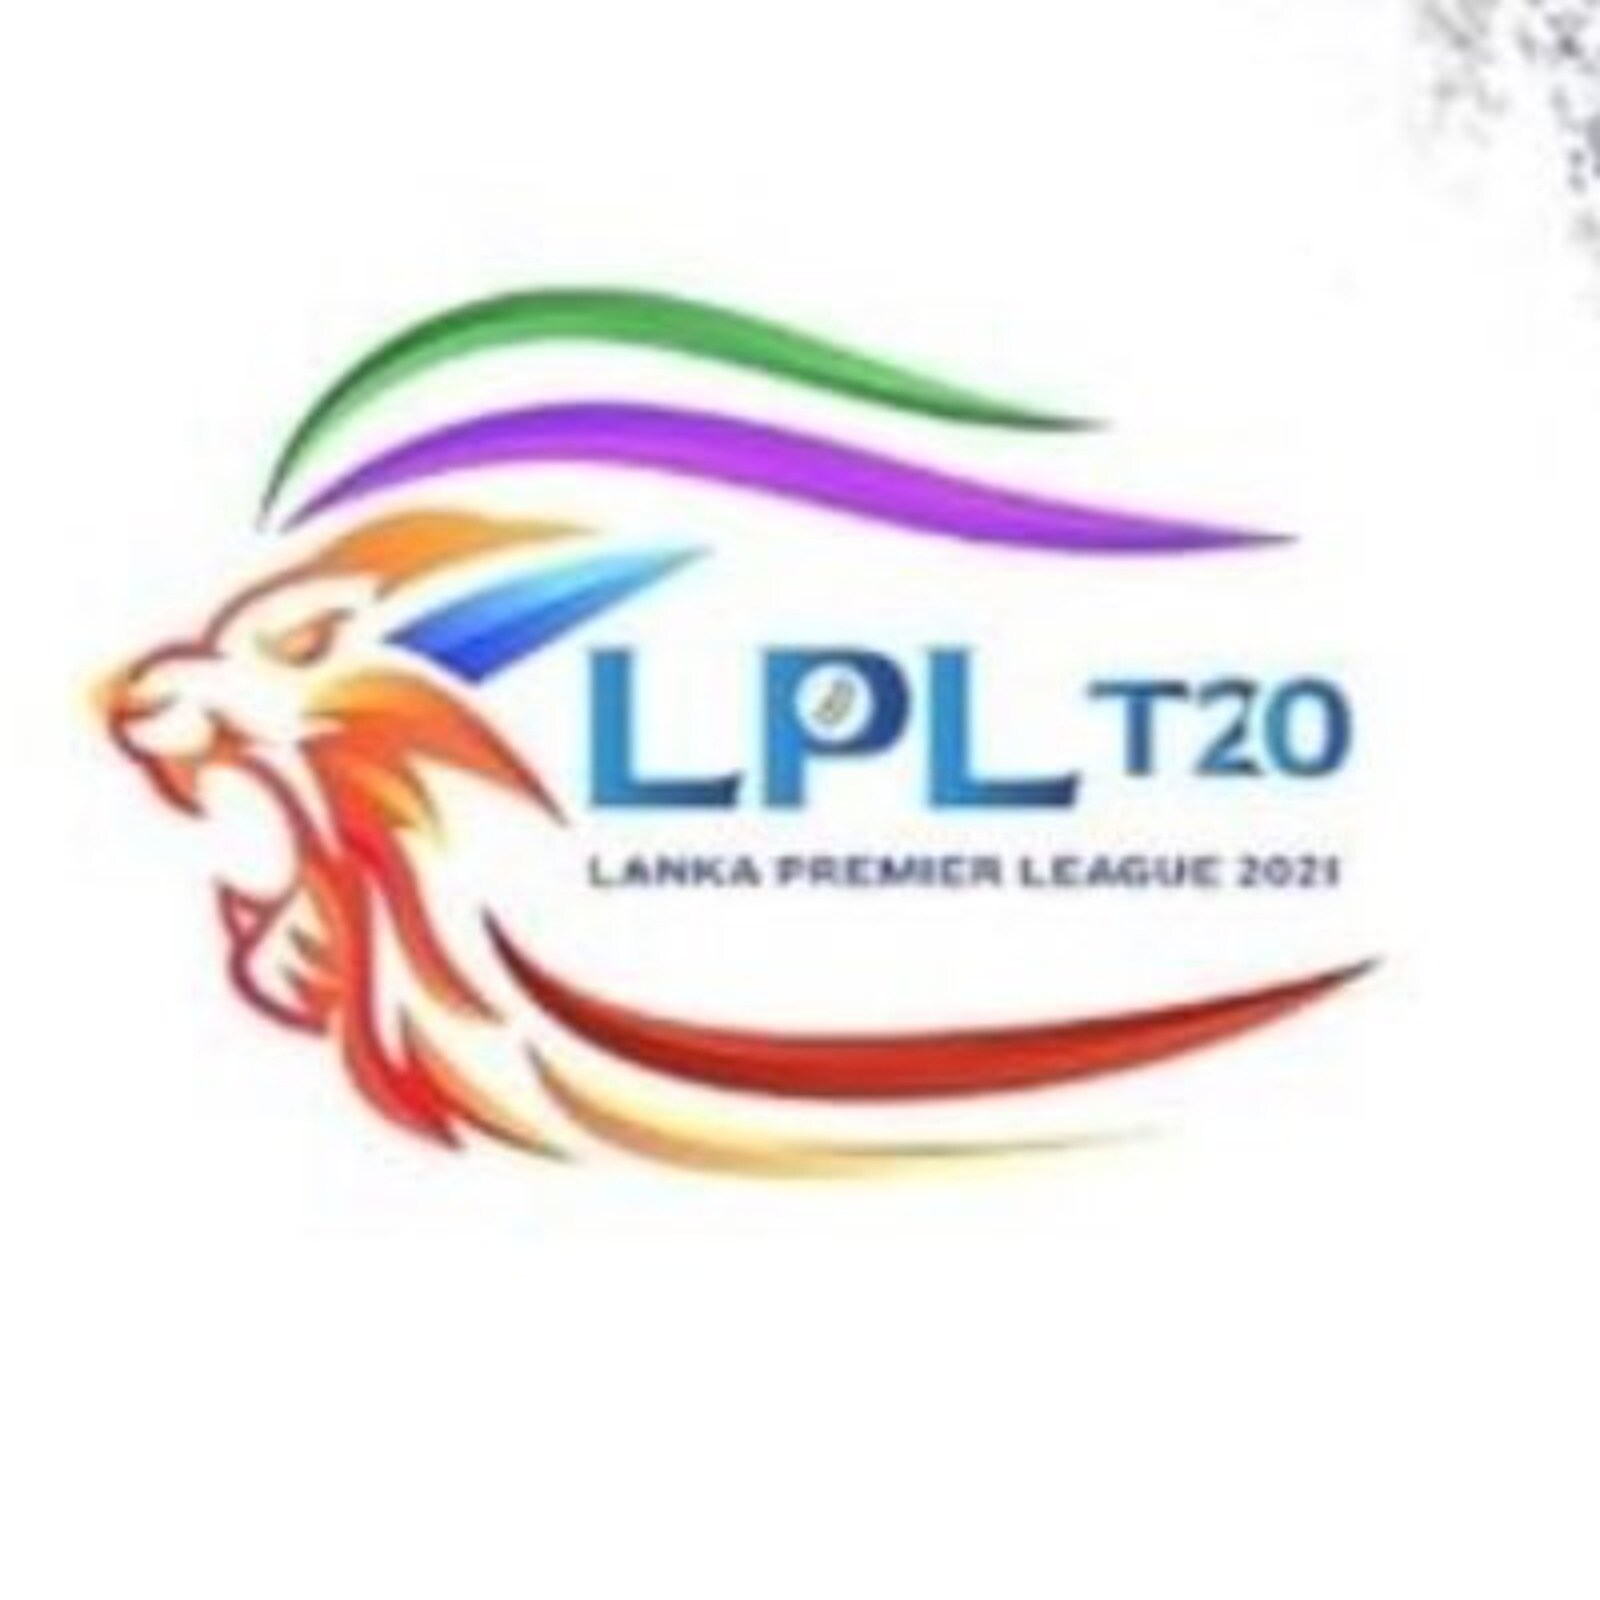 SLC Announces Lanka Premier League 2022 Will Take Place From July 31 to August 21